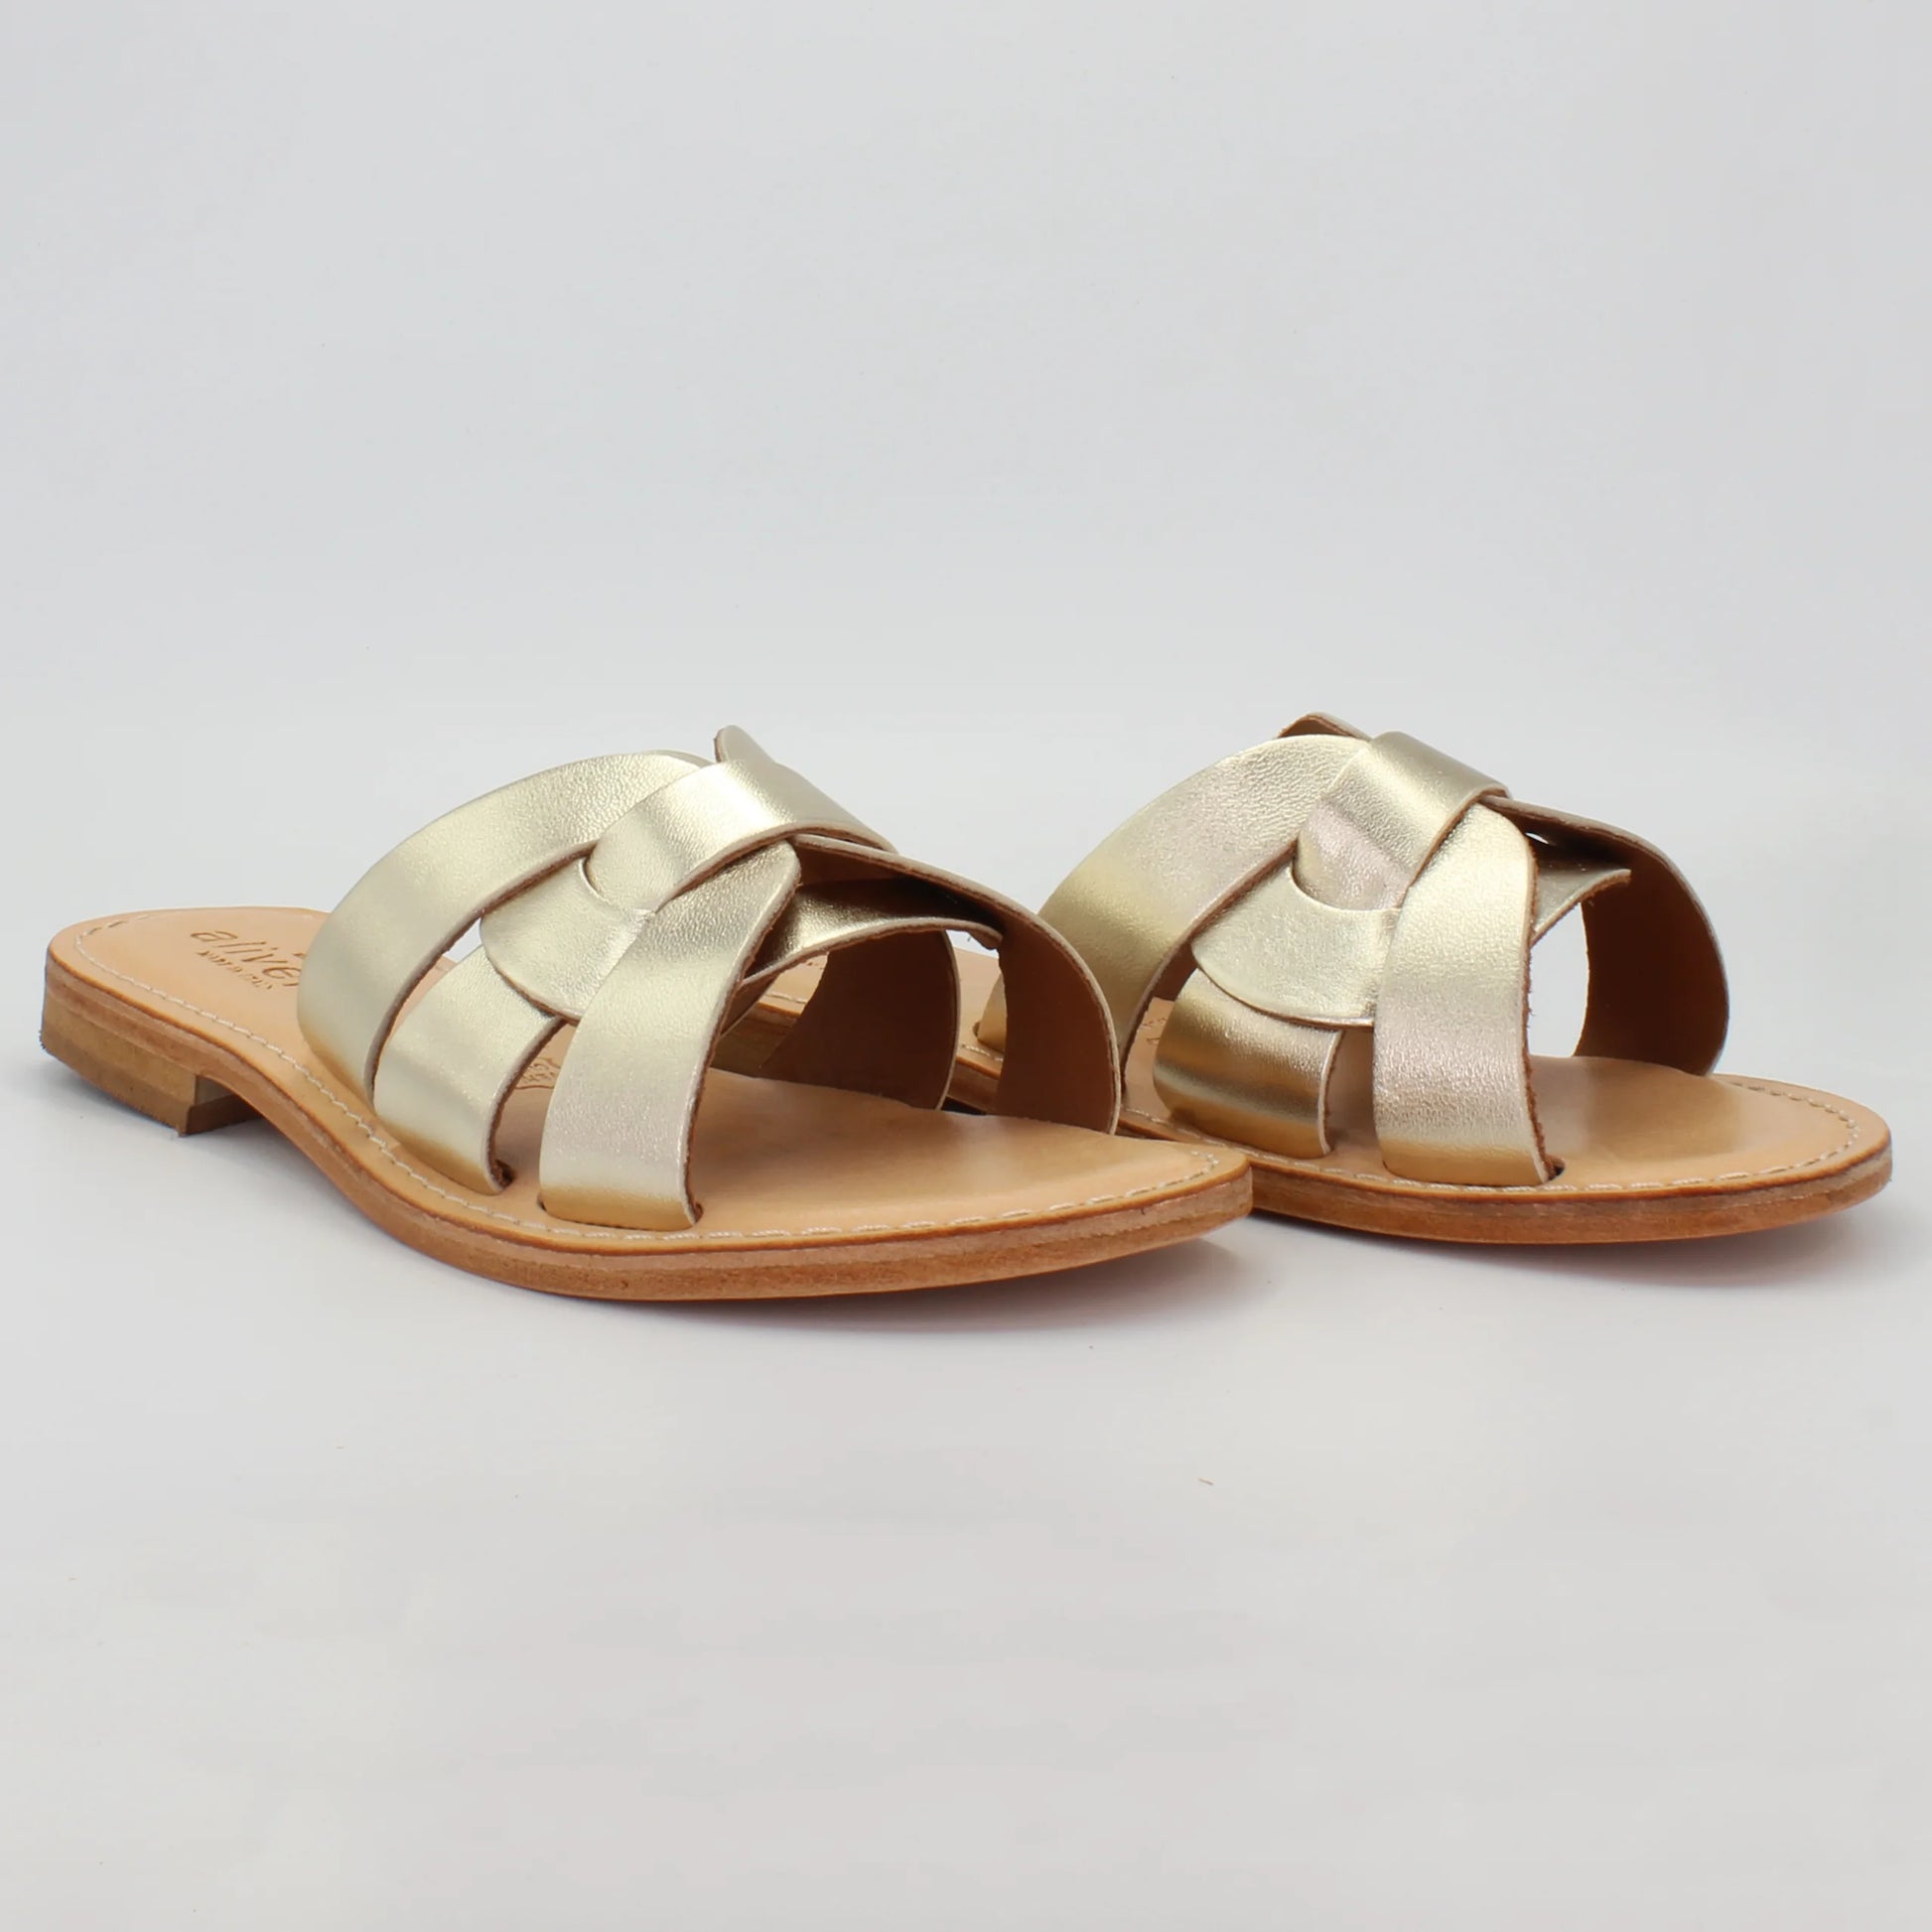 Shop Handmade Italian Leather sandal in platinum (1801) or browse our range of hand-made Italian shoes in leather or suede in-store at Aliverti Cape Town, or shop online. We deliver in South Africa & offer multiple payment plans as well as accept multiple safe & secure payment methods.